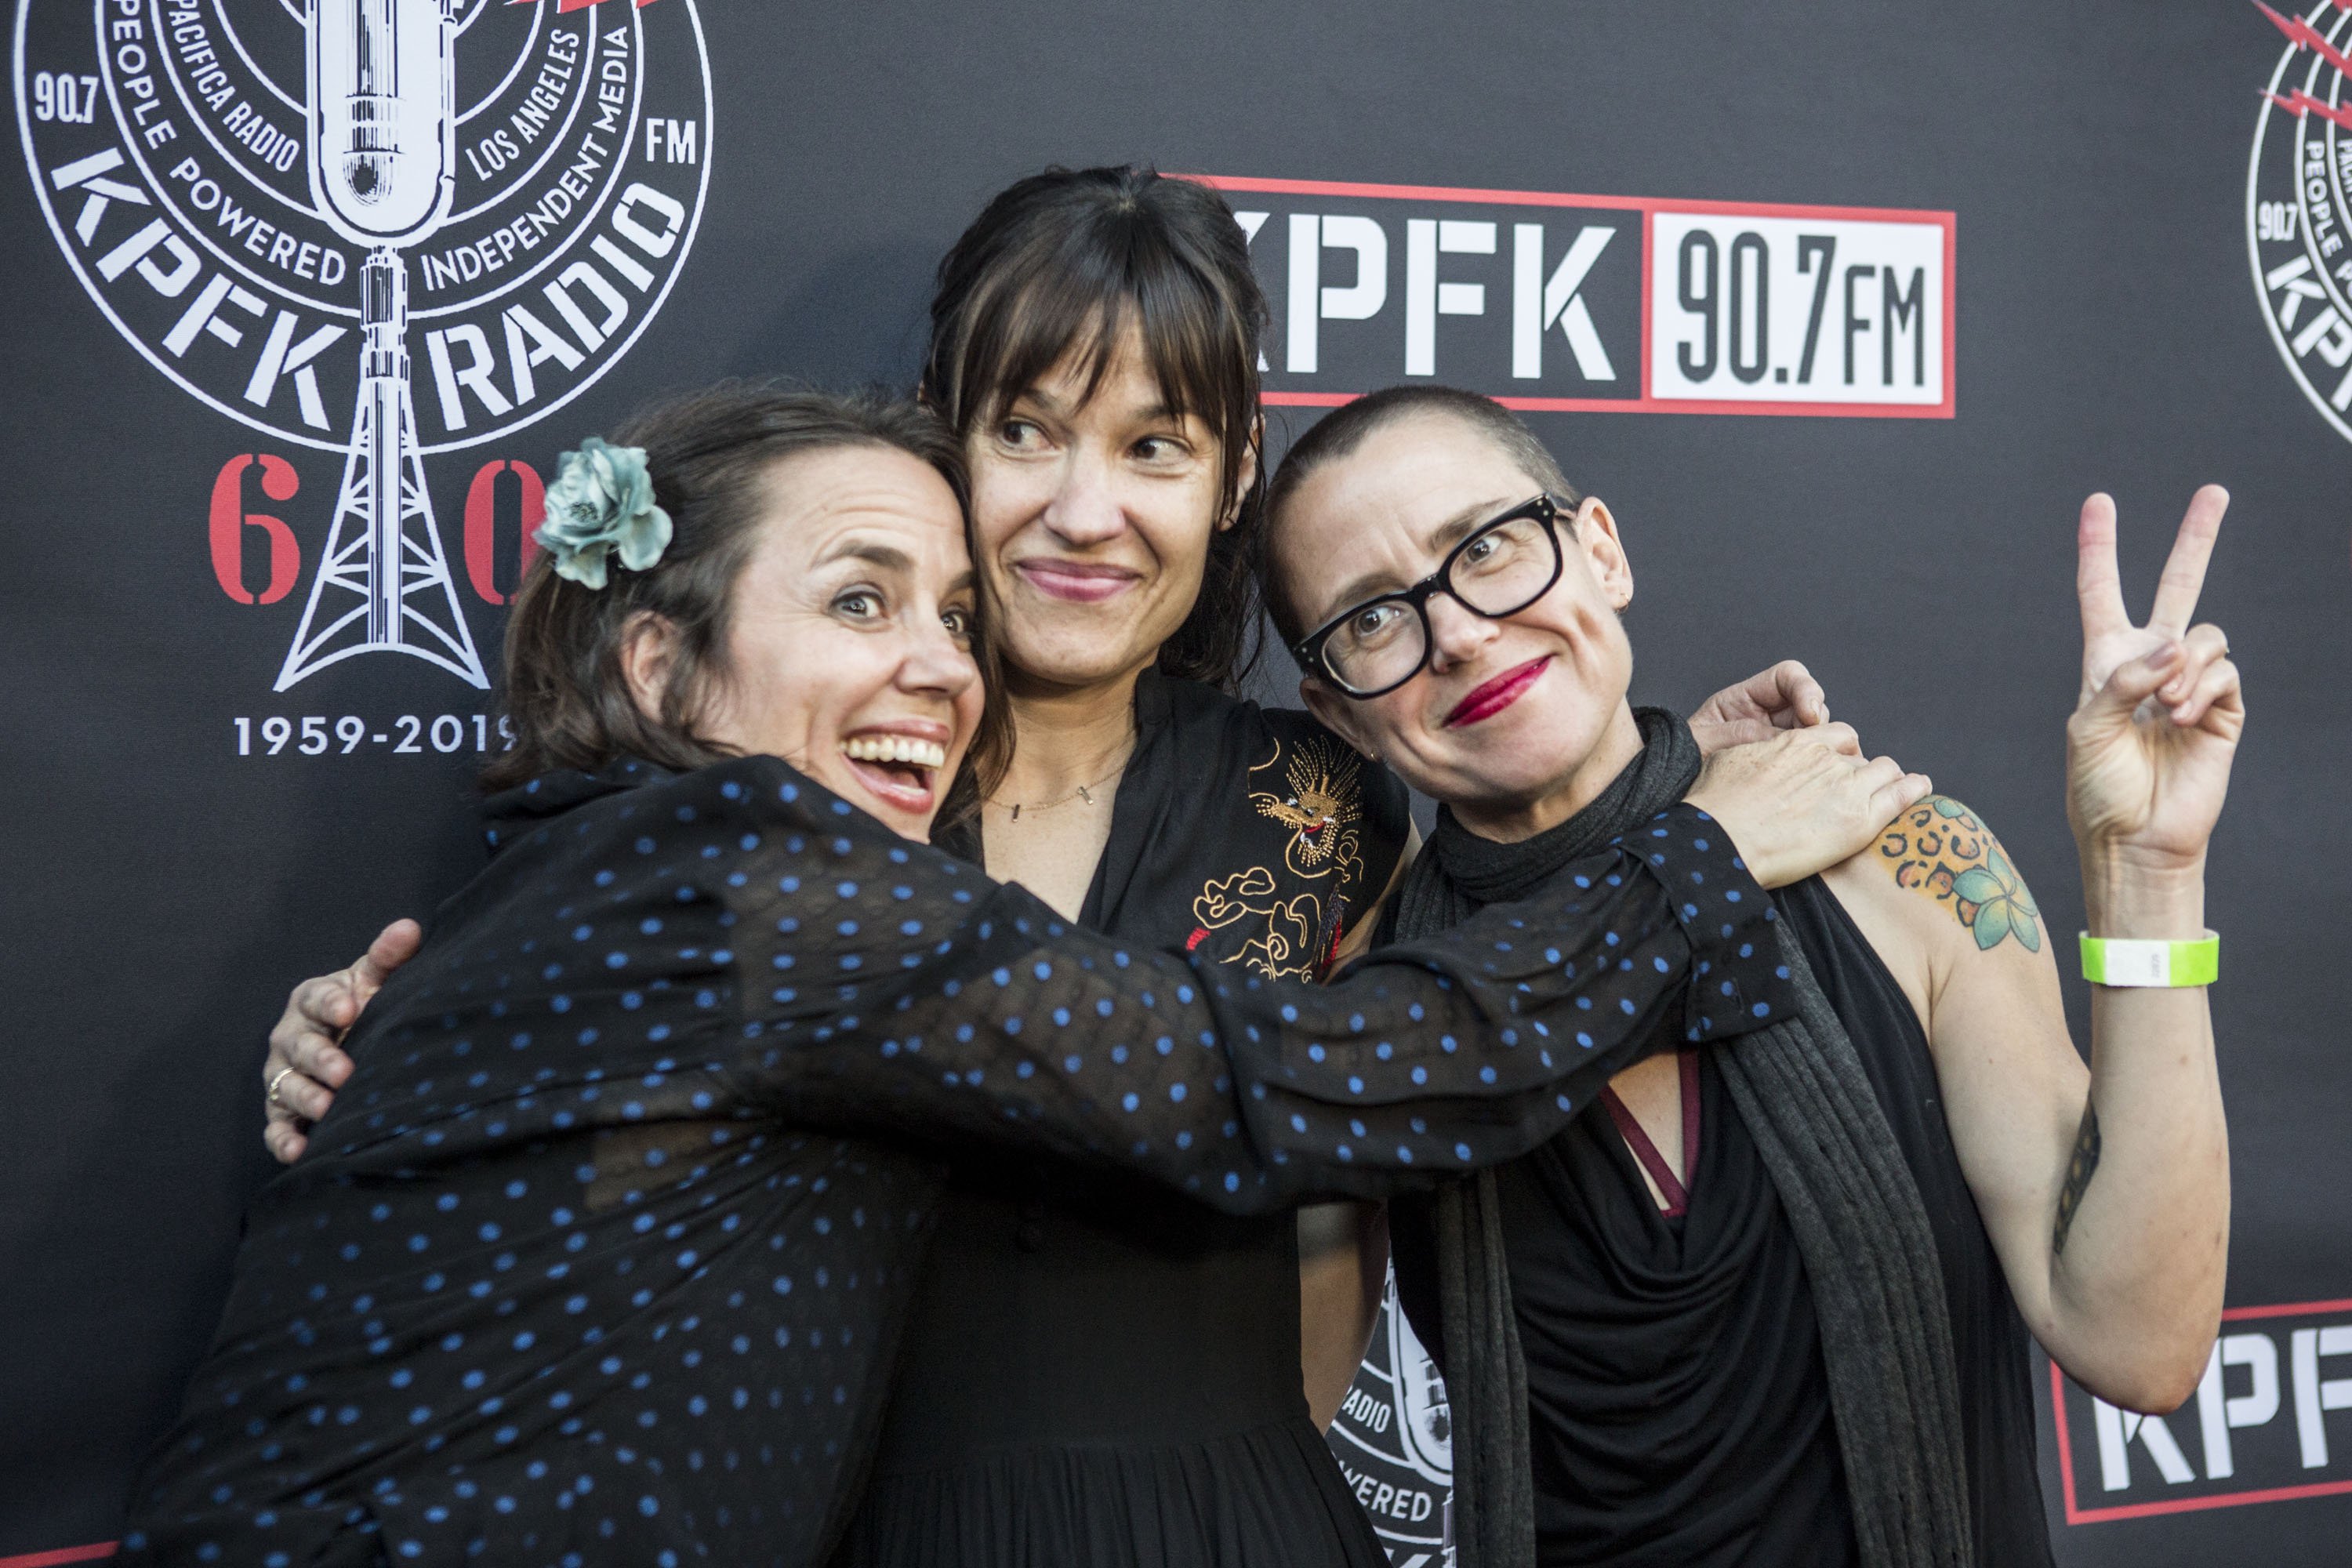 The Haden Triplets attend the KPFK 90.7FM 60th Anniversary Benefit Gala at Skirball Cultural Center on September 7, 2019, in Los Angeles, California. | Source: Getty Images